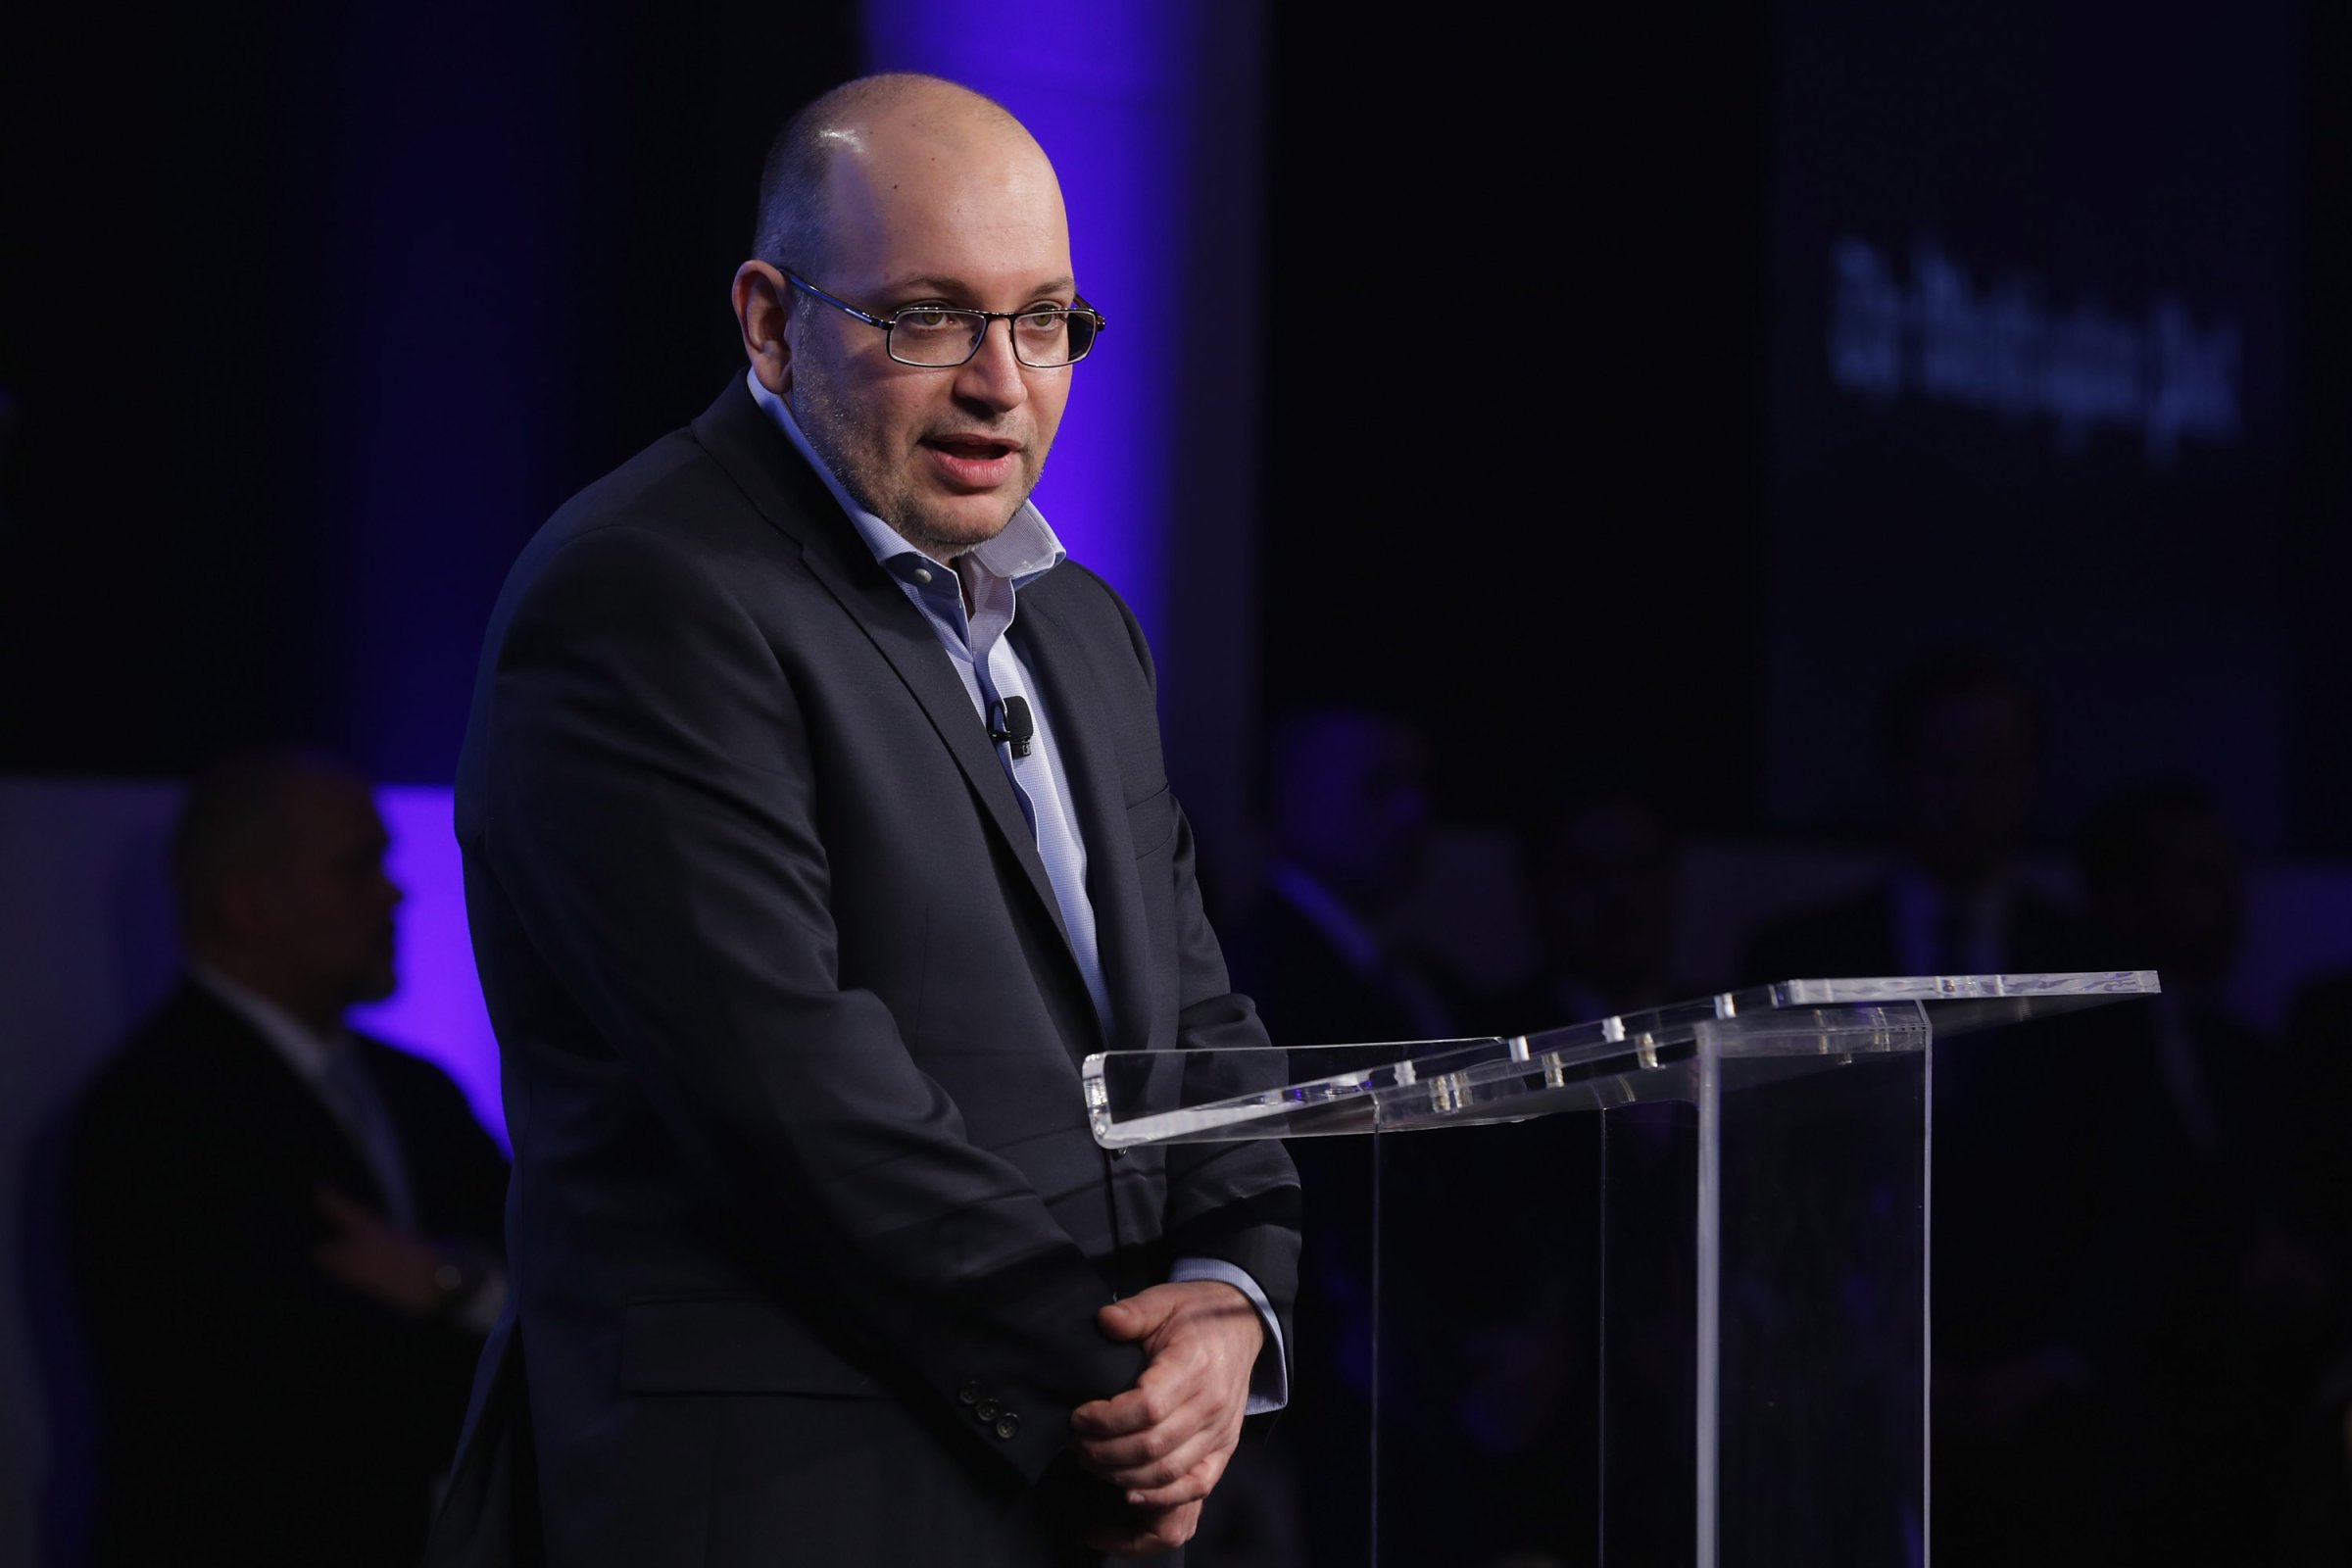 Washington Post reporter and former Tehran bureau chief Jason Rezaian delivers remarks during the opening ceremony of the newspaper's new location in Washington, D.C., on Jan. 28, 2016.